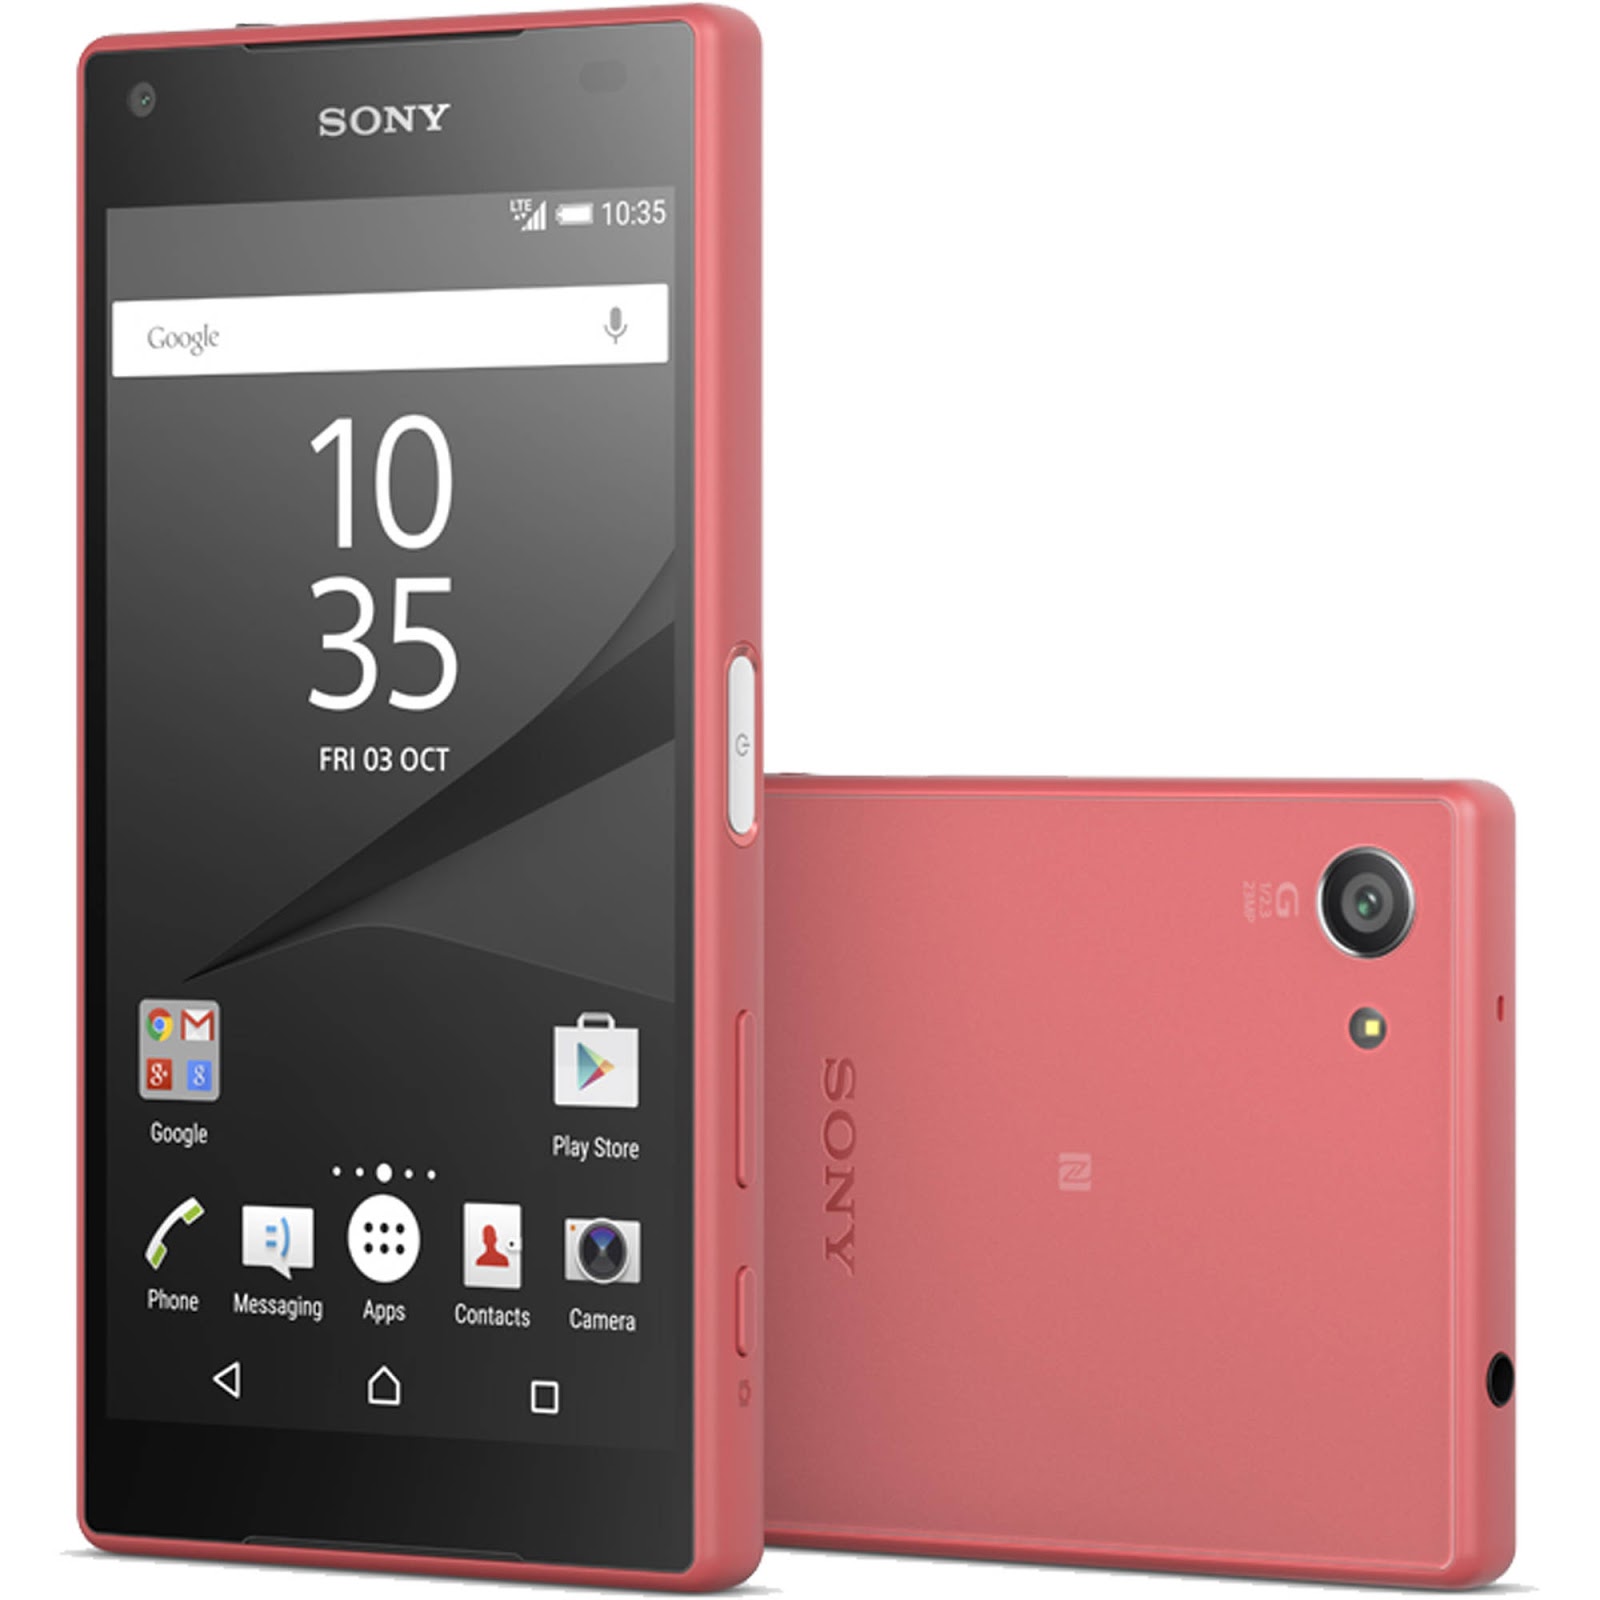 Sony Xperia Z5 Compact Price & Details - Mobile Specifications